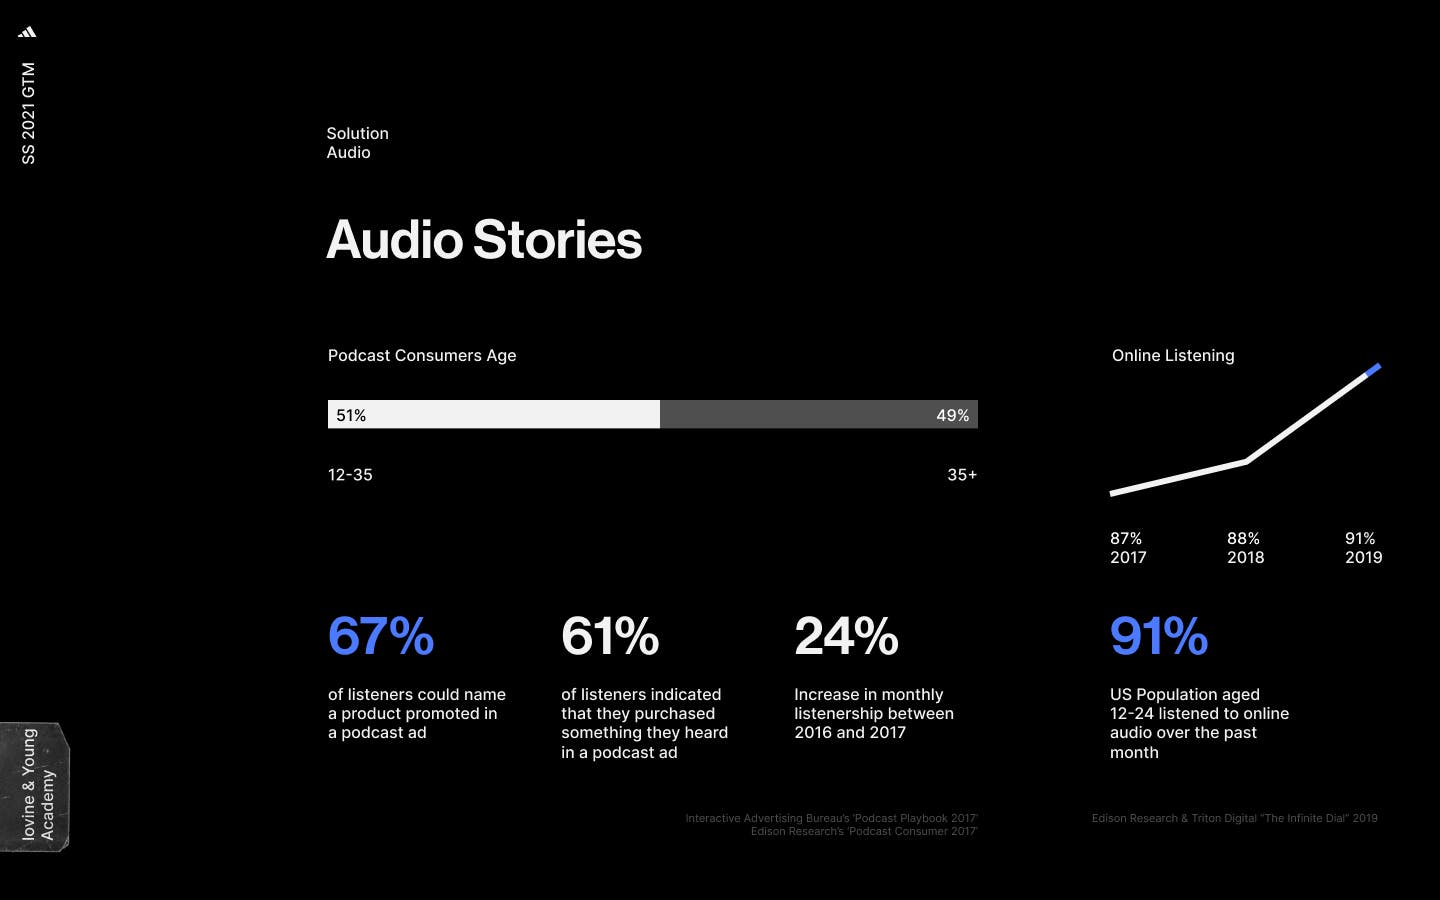 A slide from a marketing pitch showing why audio is an effective way to reach athletes